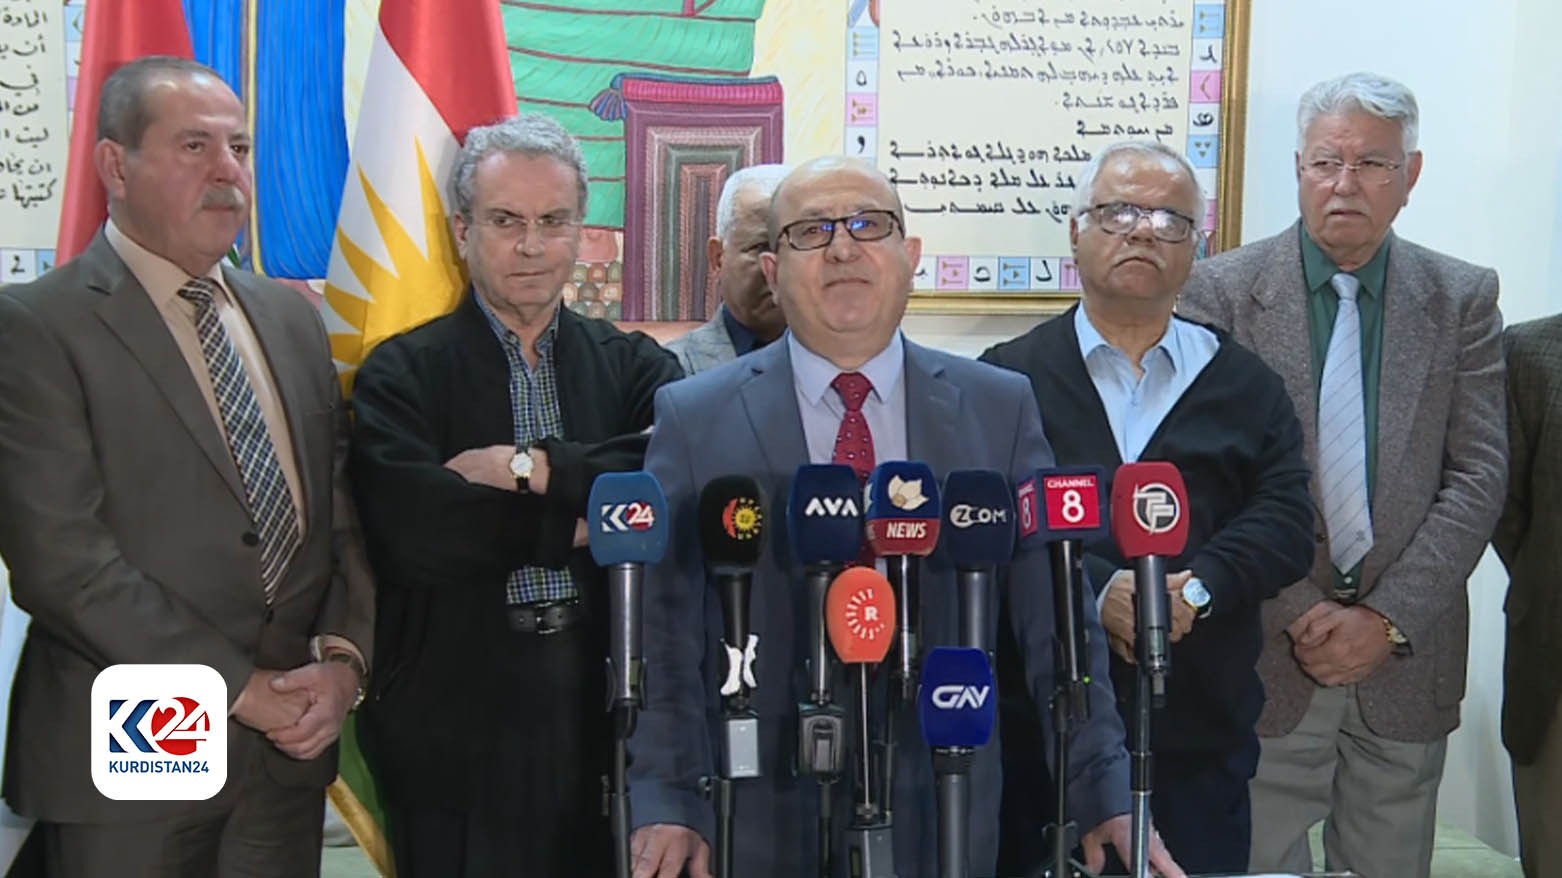 Representatives of Chaldean, Assyrian, and Armenian speaking at the press conference, March 16, 2024. (Photo: Kurdistan24)